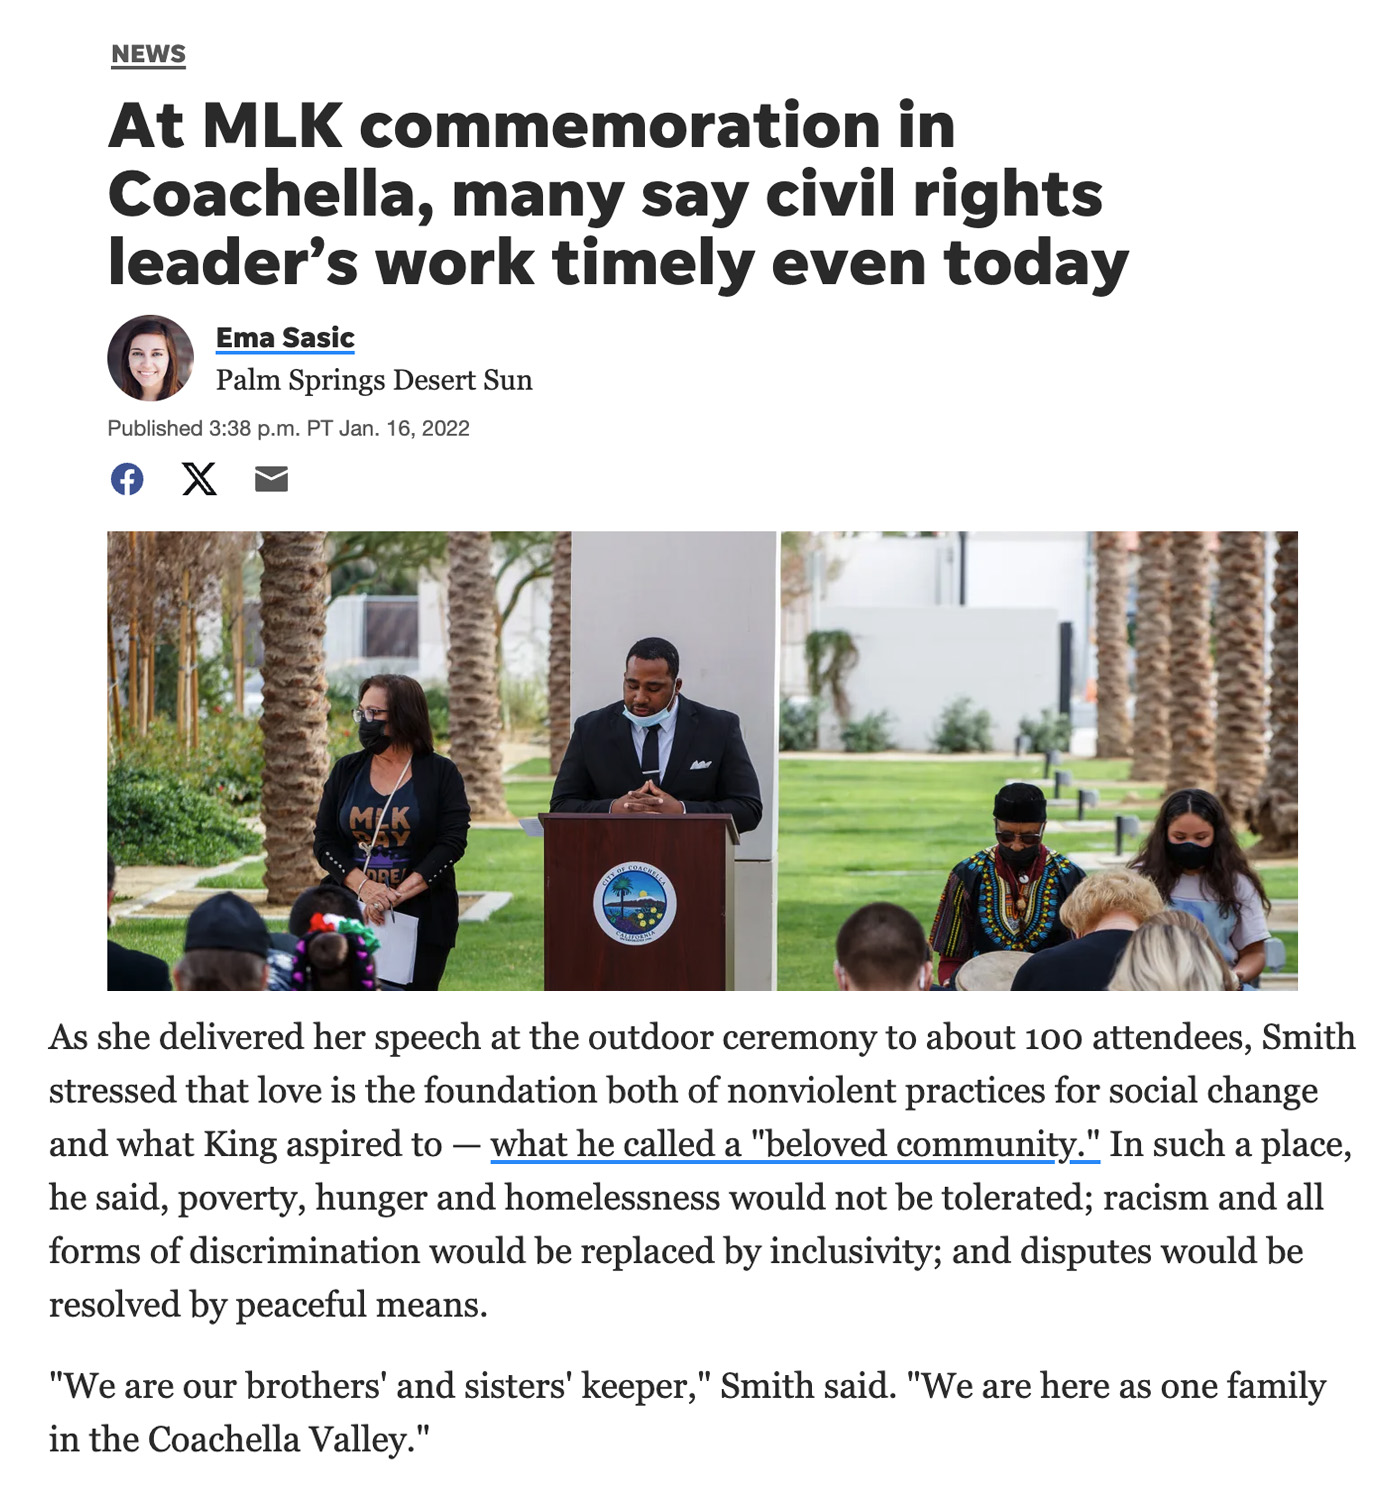 At MLK commemoration in Coachella, many say civil rights leader’s work timely even today